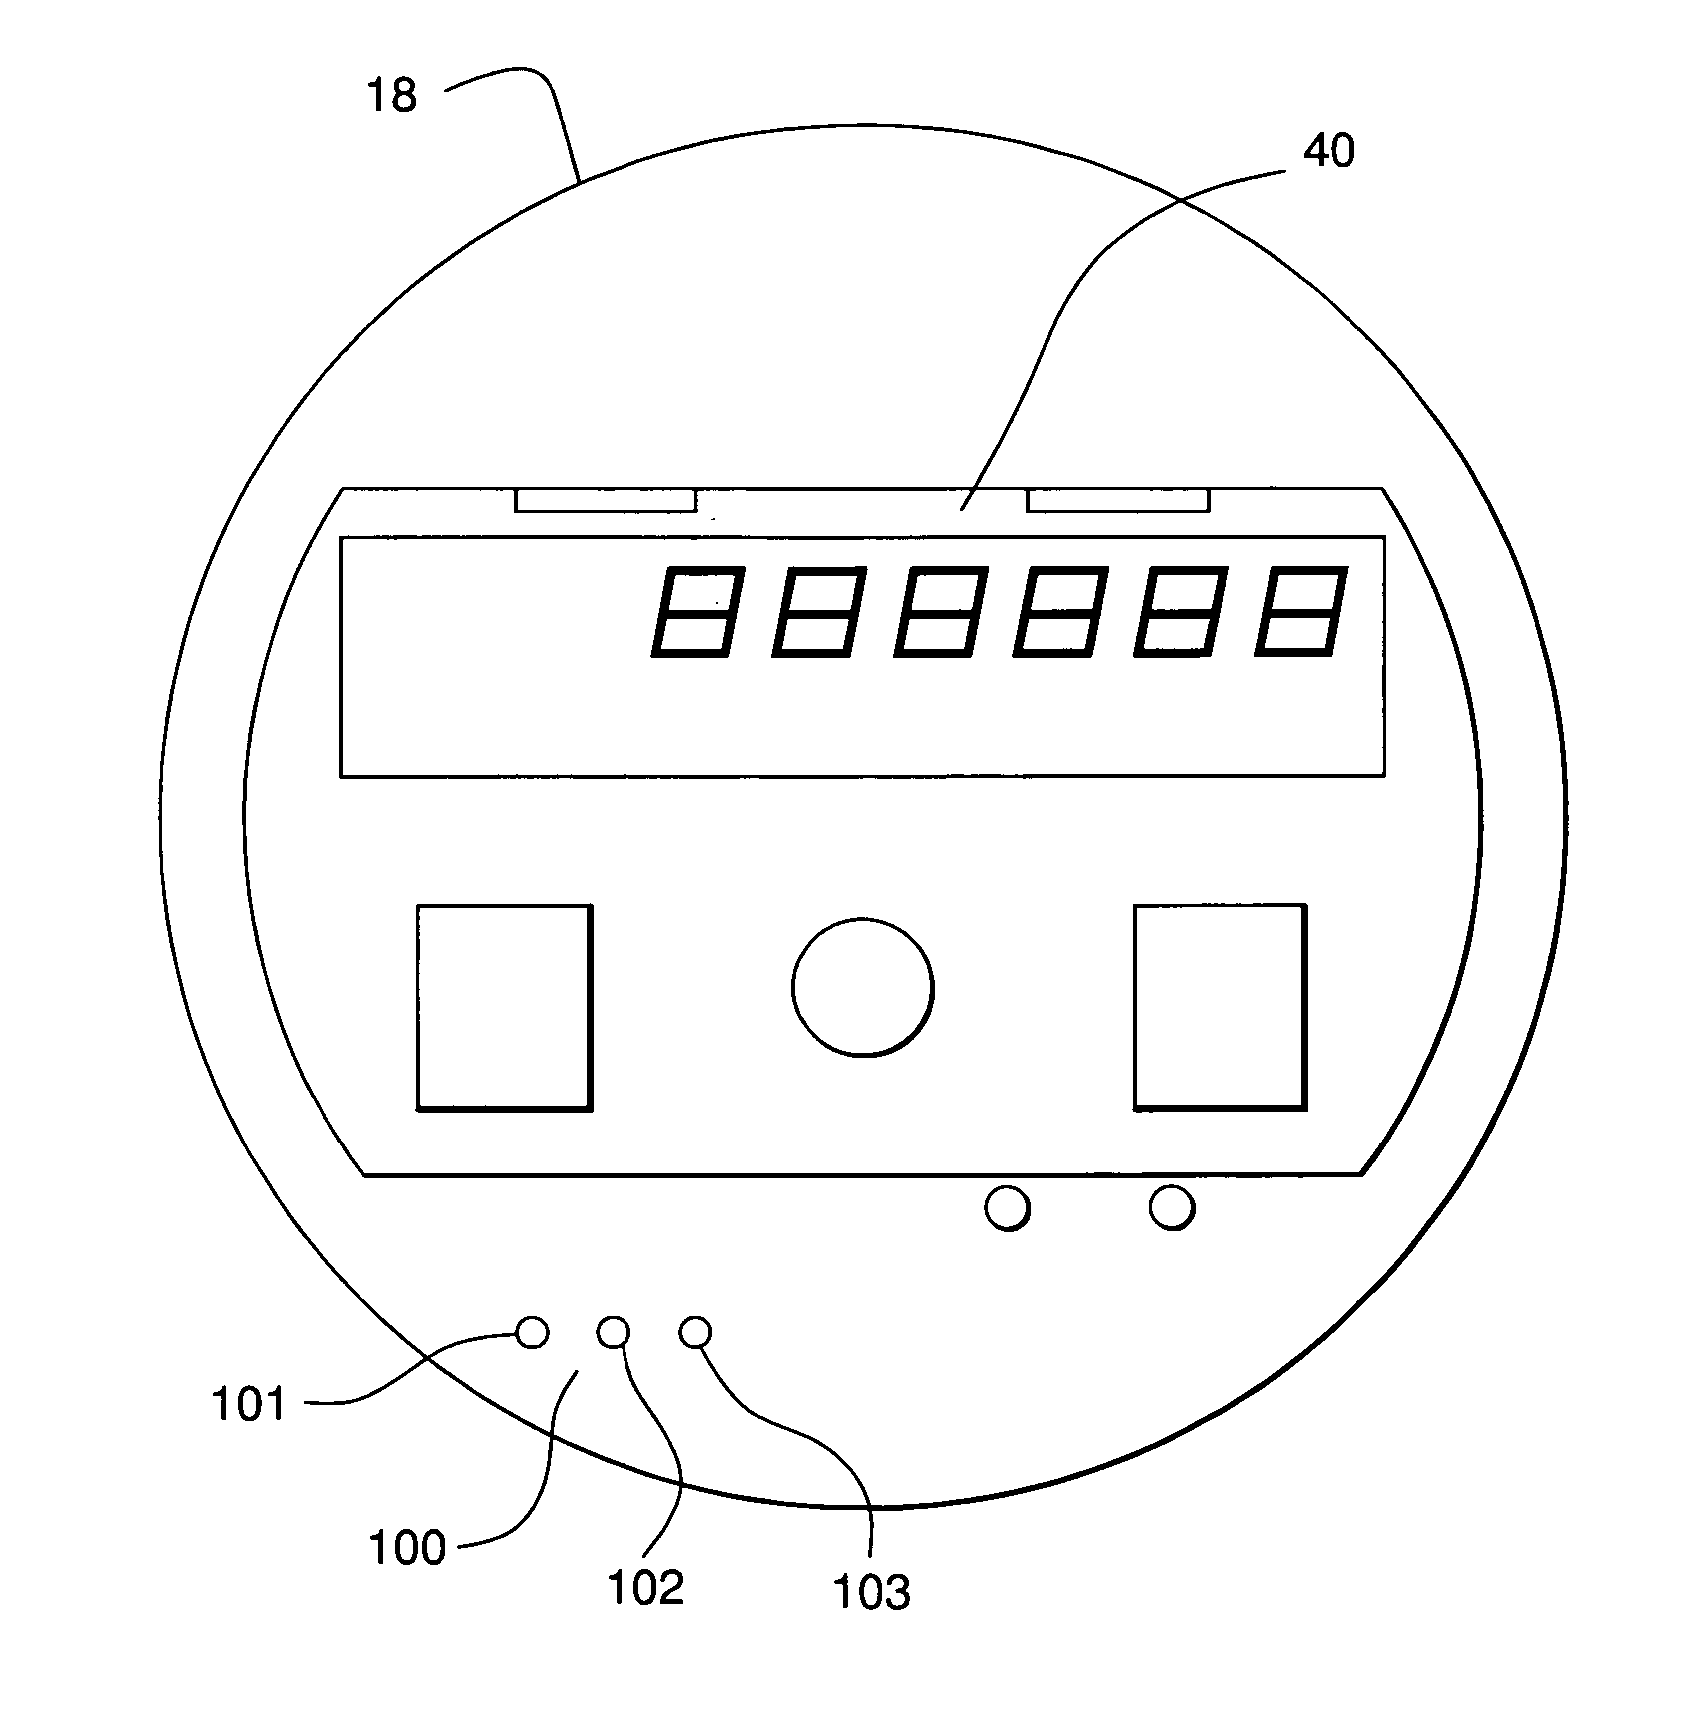 Electrical-energy meter adaptable for optical communication with various external devices